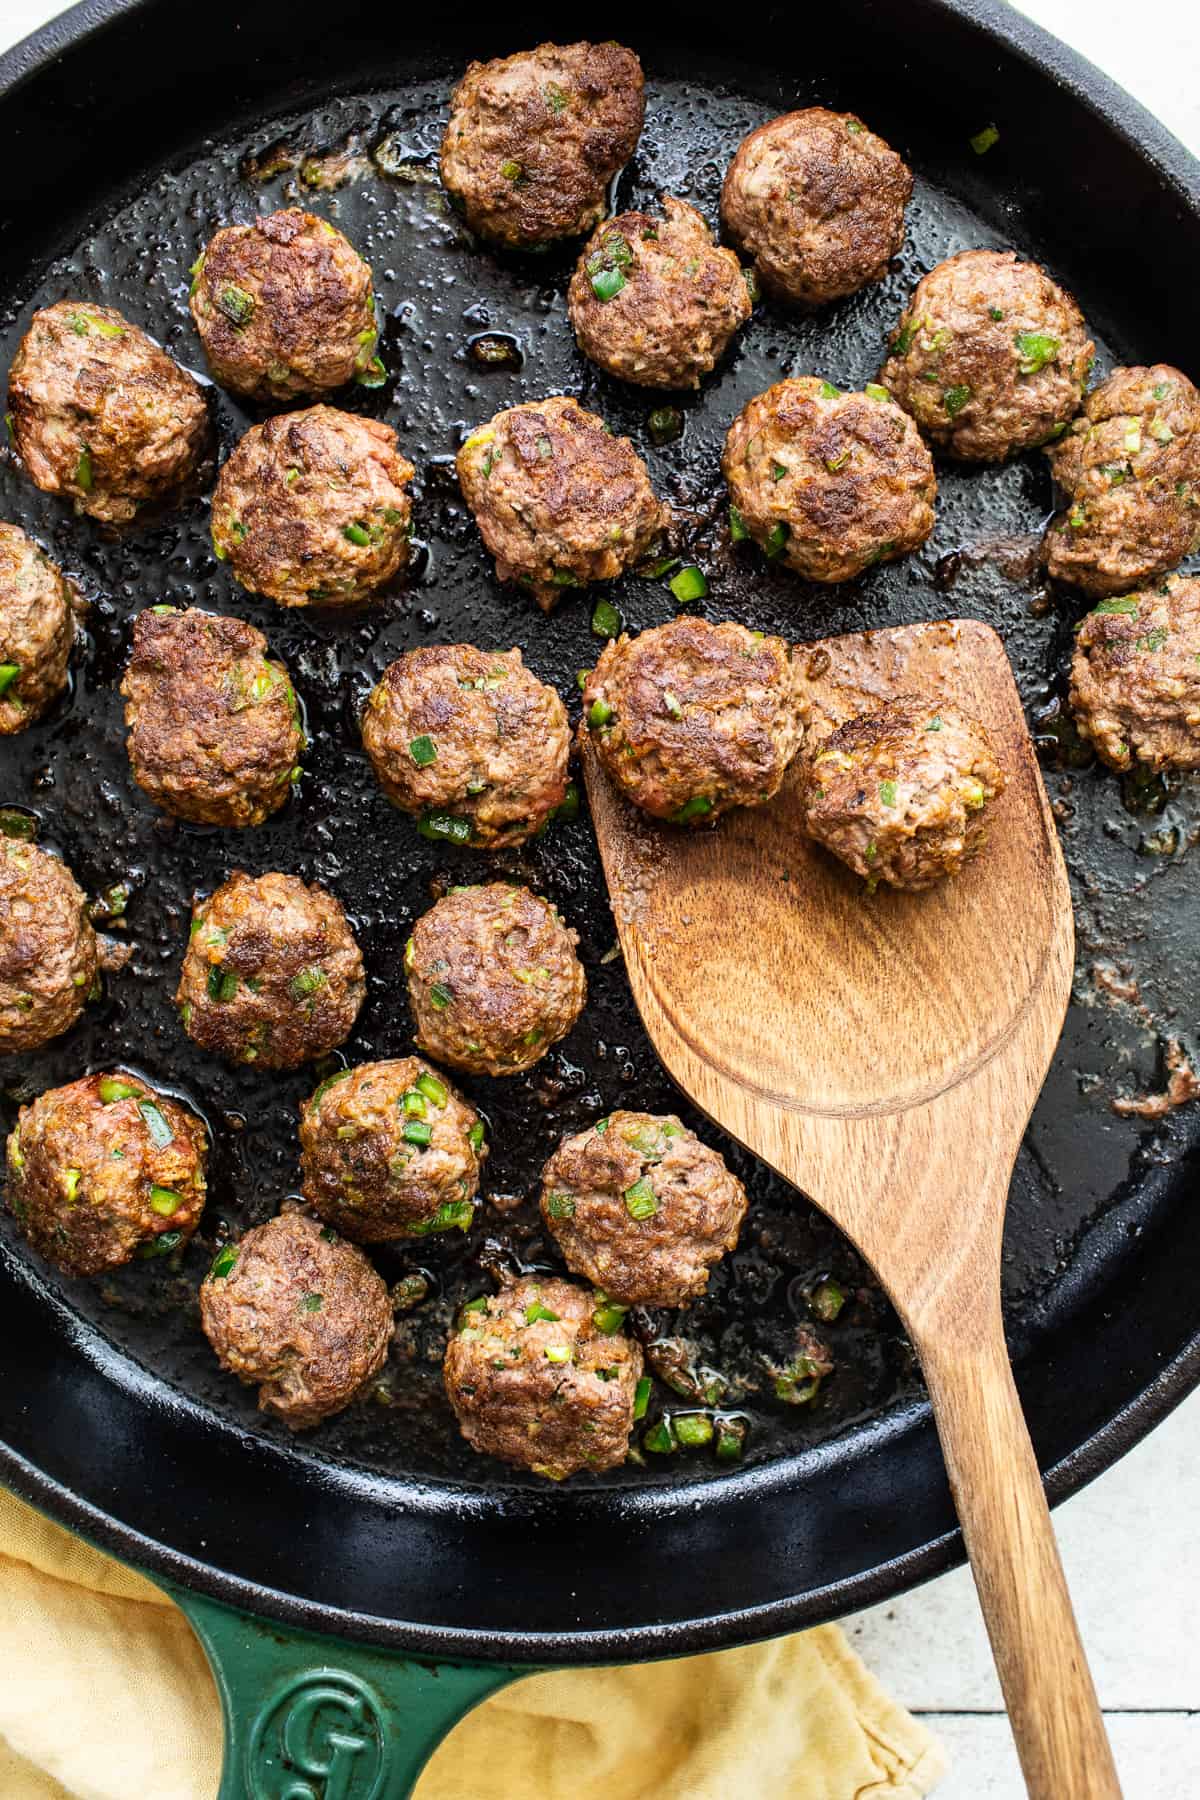 Meatballs seared in a cast iron skillet.